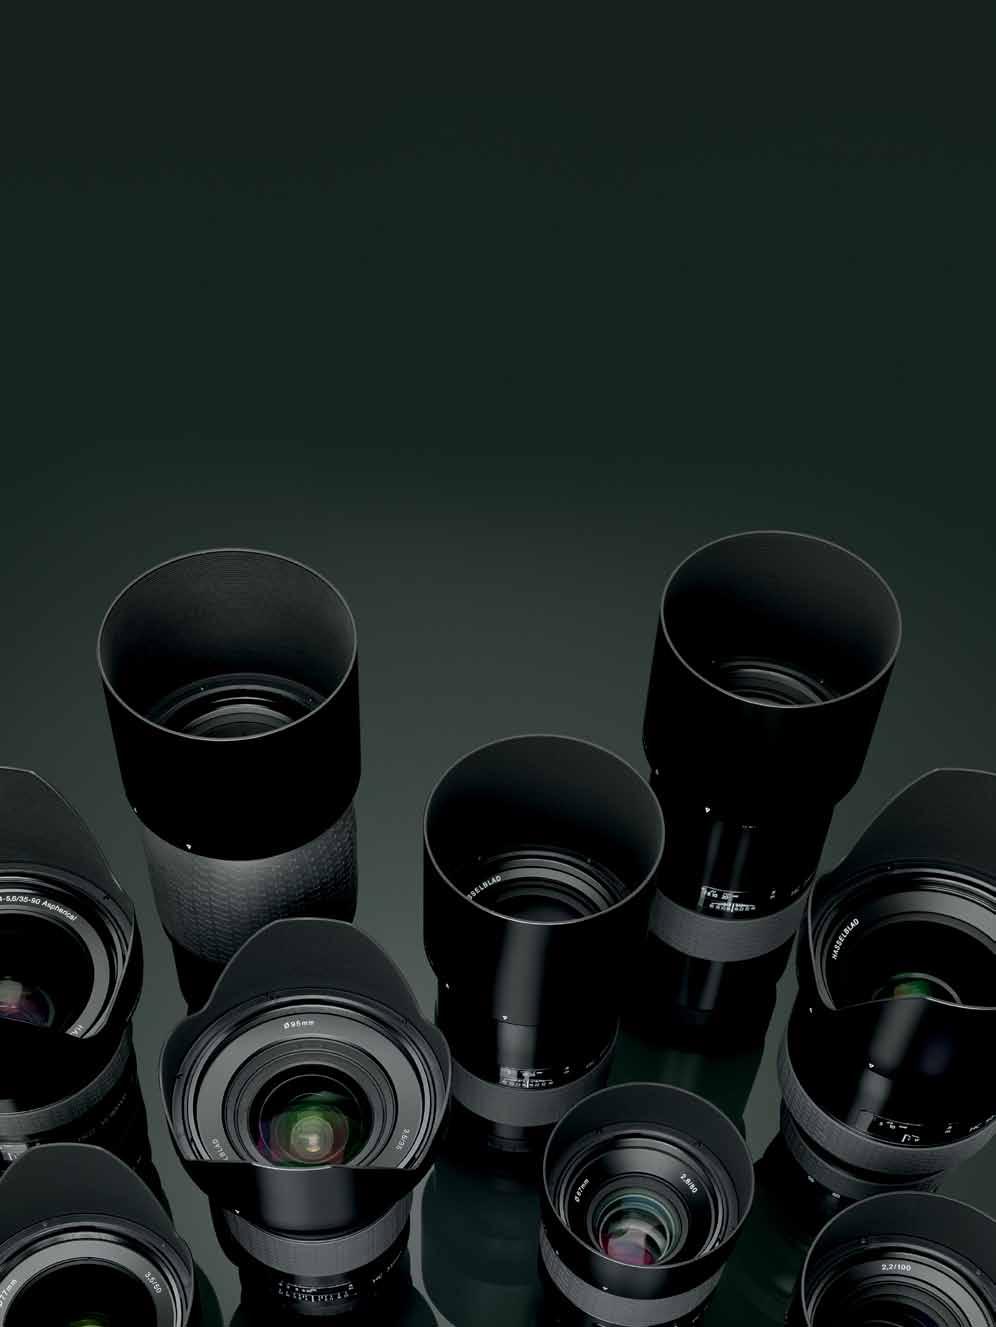 Hasselblad lenses are just that; designed with digital corrections and processing and extremely high resolution in mind.